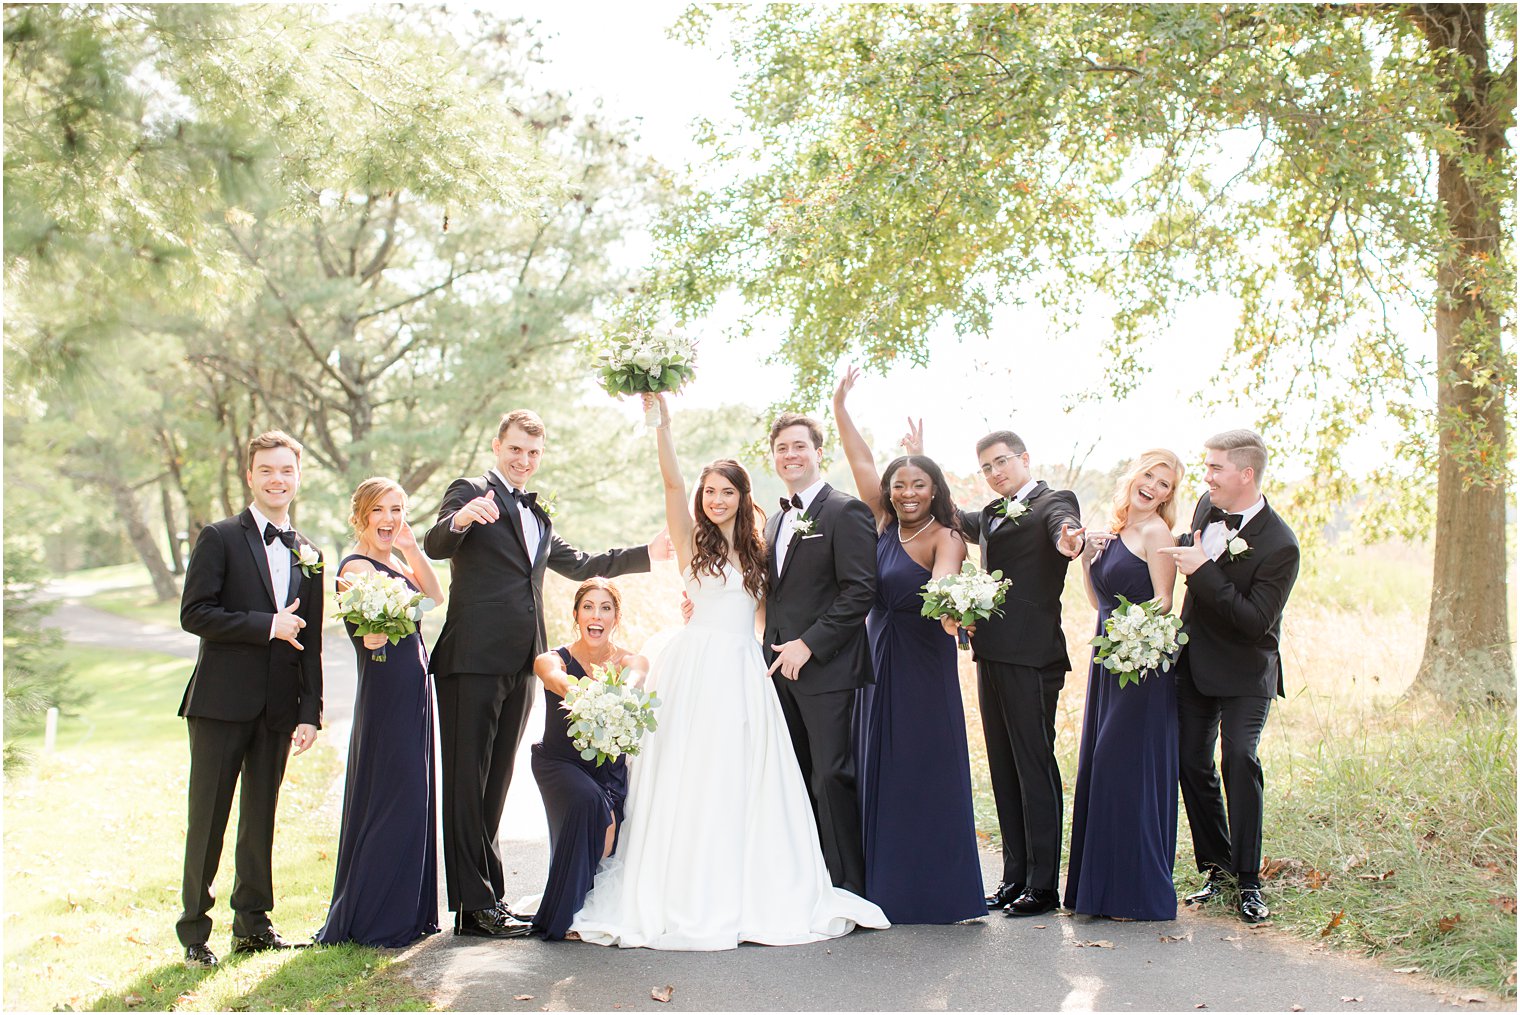 newlyweds cheer with wedding party during NJ wedding photos